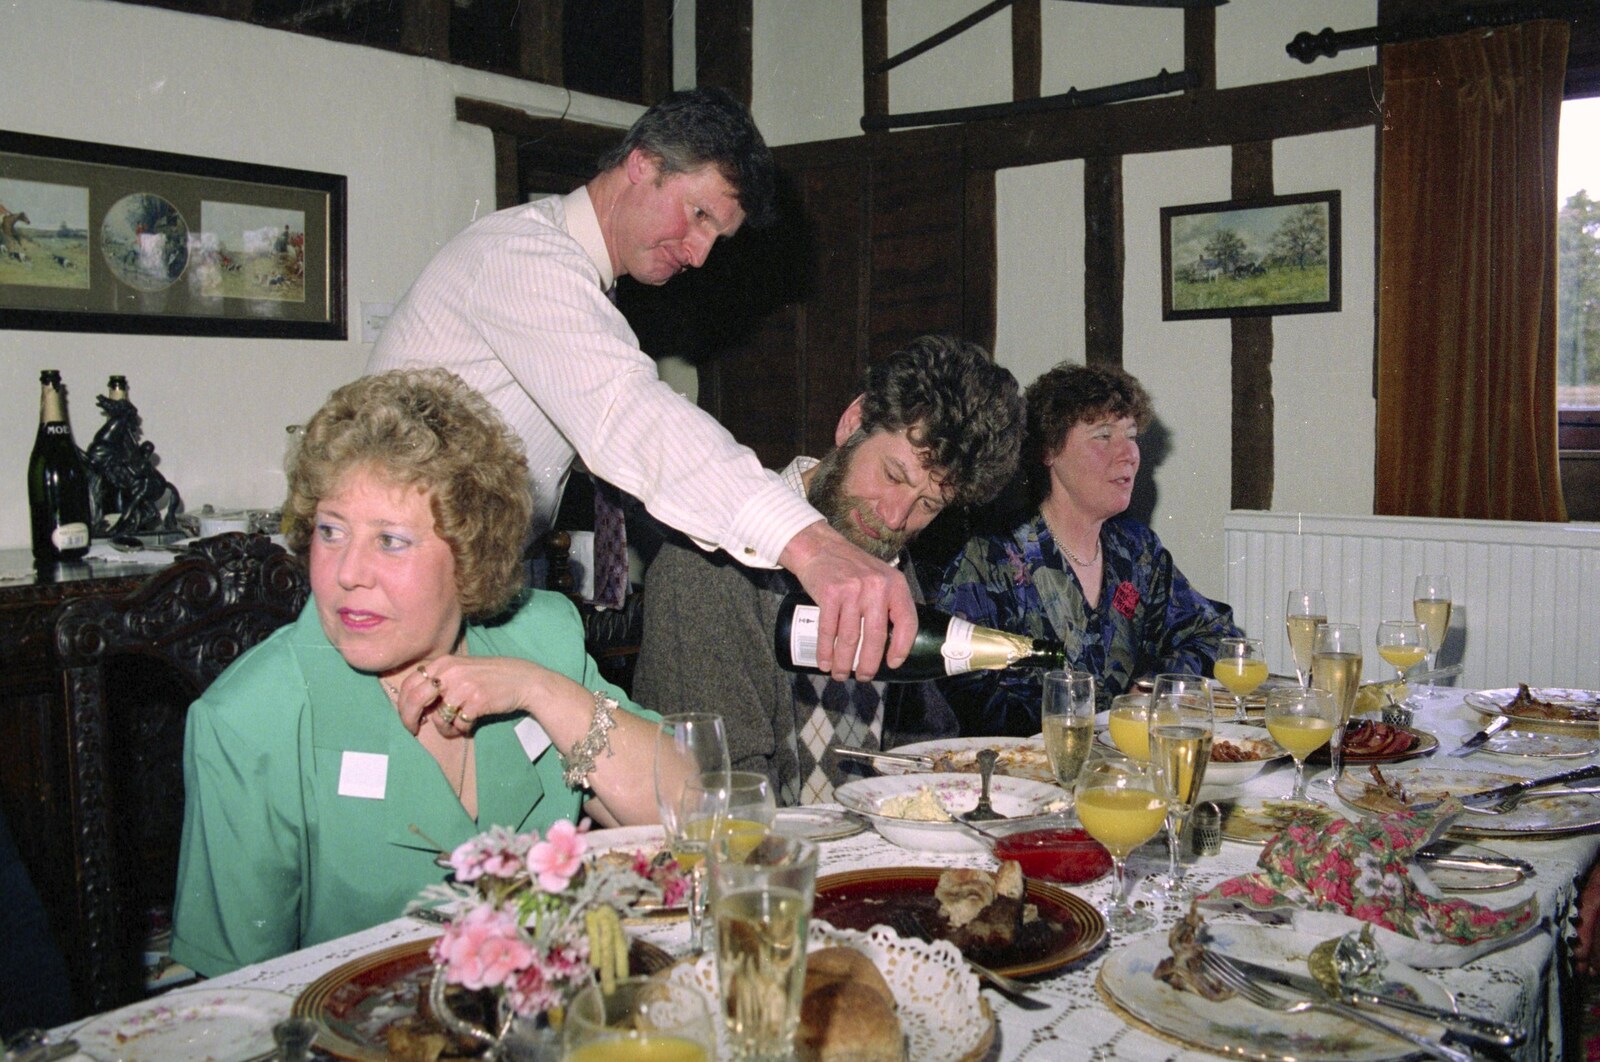 Geoff pours the drinks from Dinner Round Geoff and Brenda's, and Hamish Visits, Stuston, Suffolk - 6th April 1992